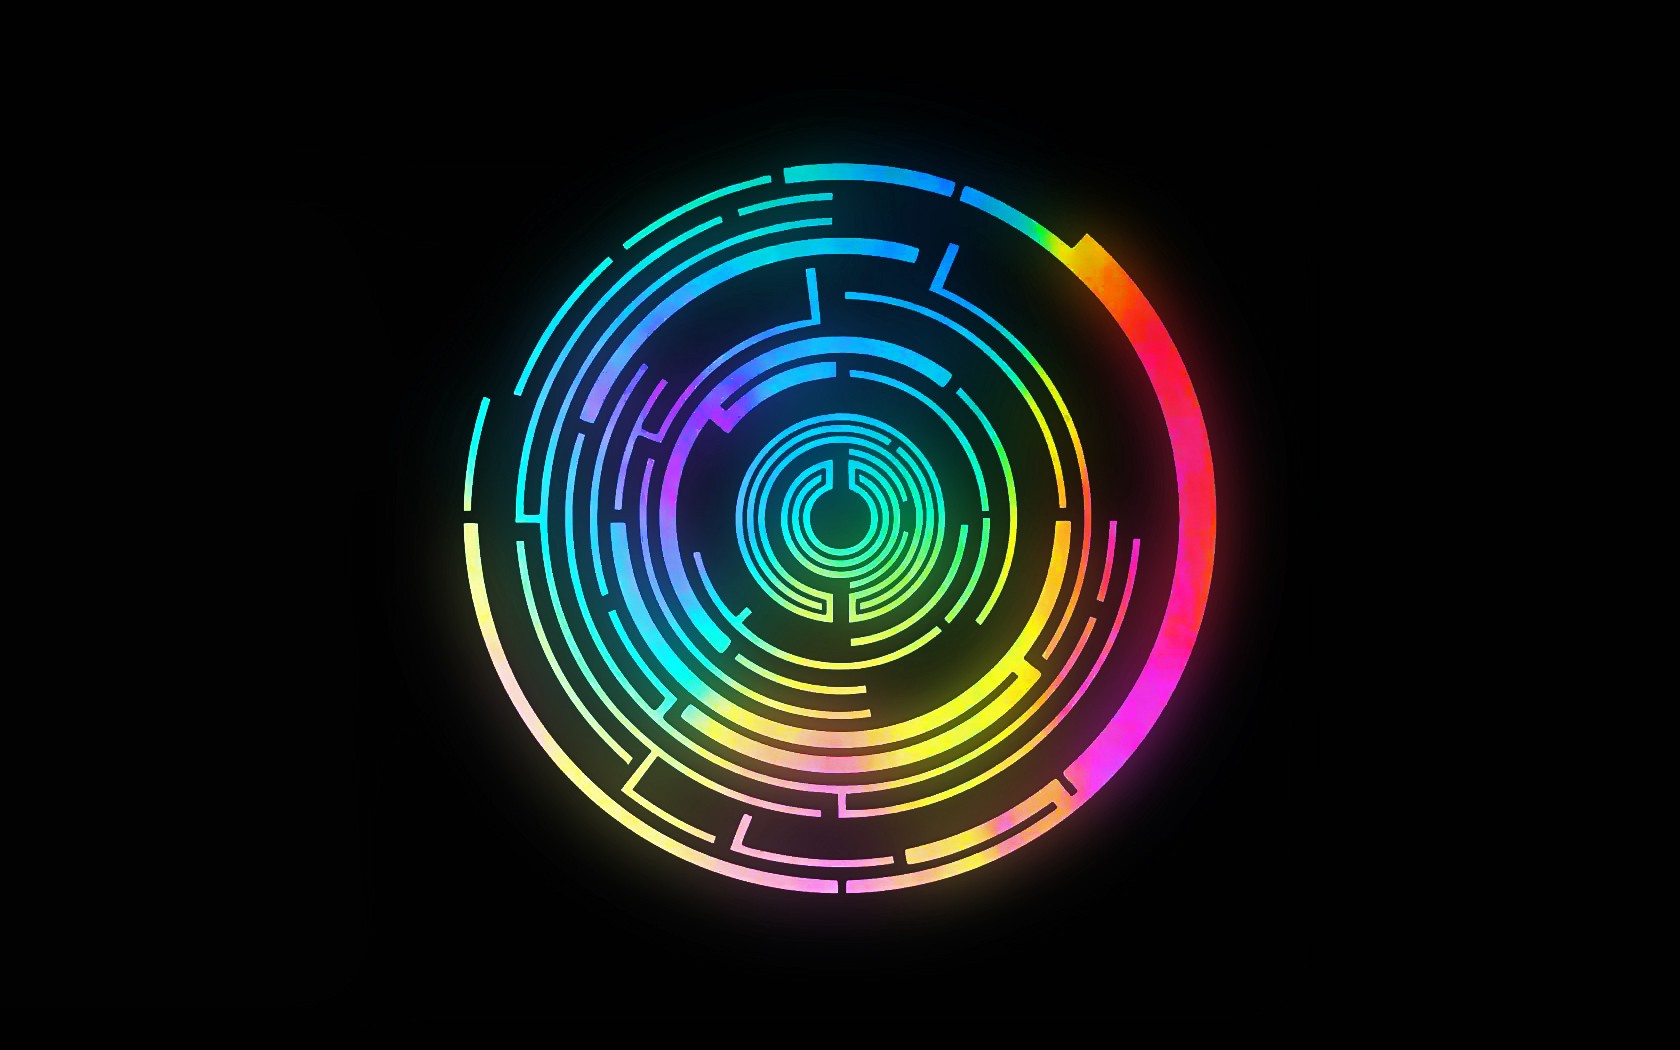 Wallpaper, colorful, neon, abstract, spiral, sphere, graphic design, circle, Pendulum, light, line, graphics, 1680x1050 px, computer wallpaper, font, special effects 1680x1050